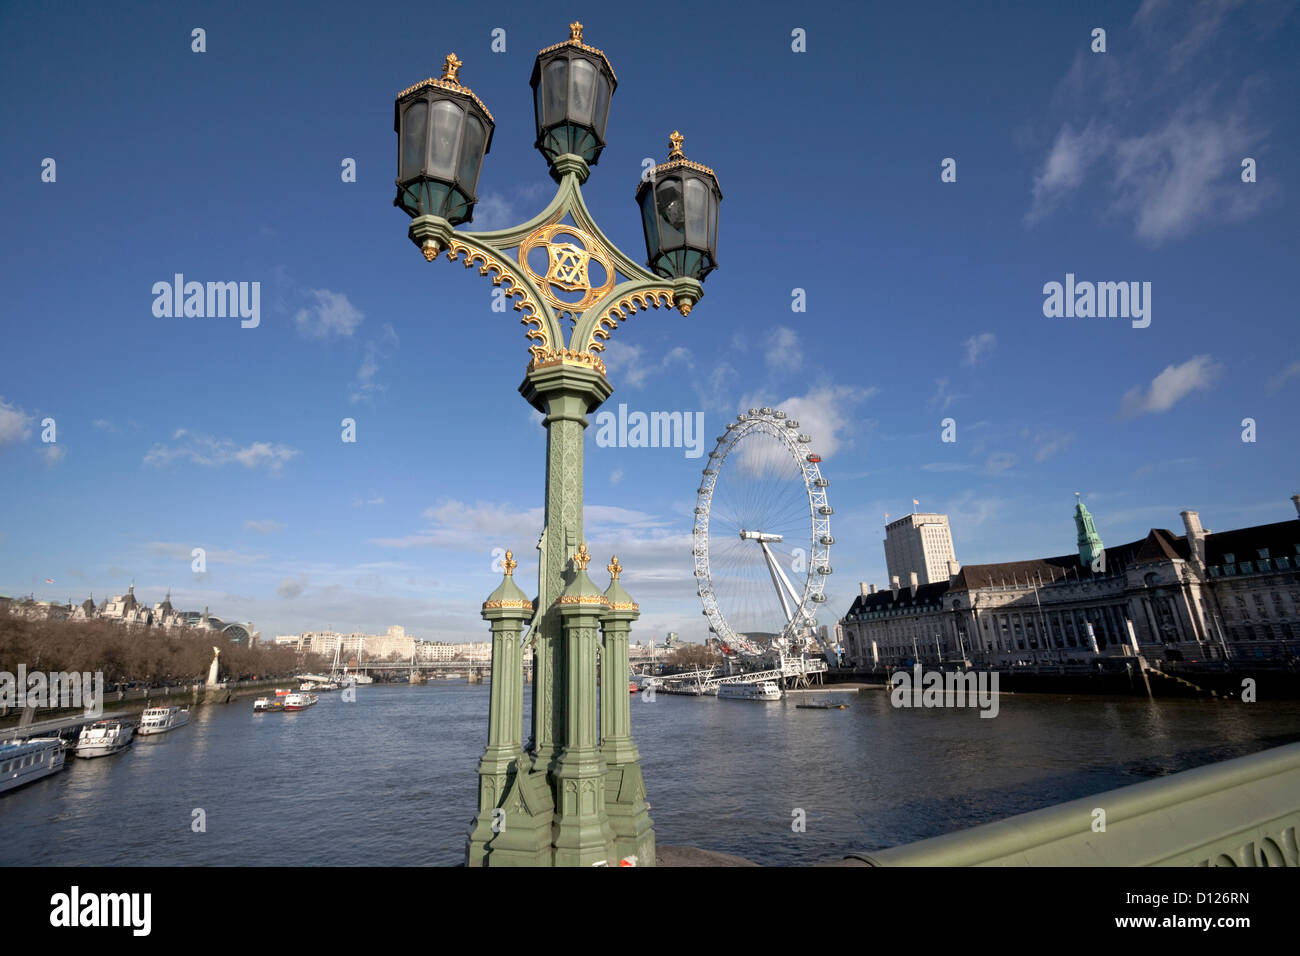 Lamp post on Westminster Bridge and view of River Thames and the London Eye, London, England, UK Stock Photo